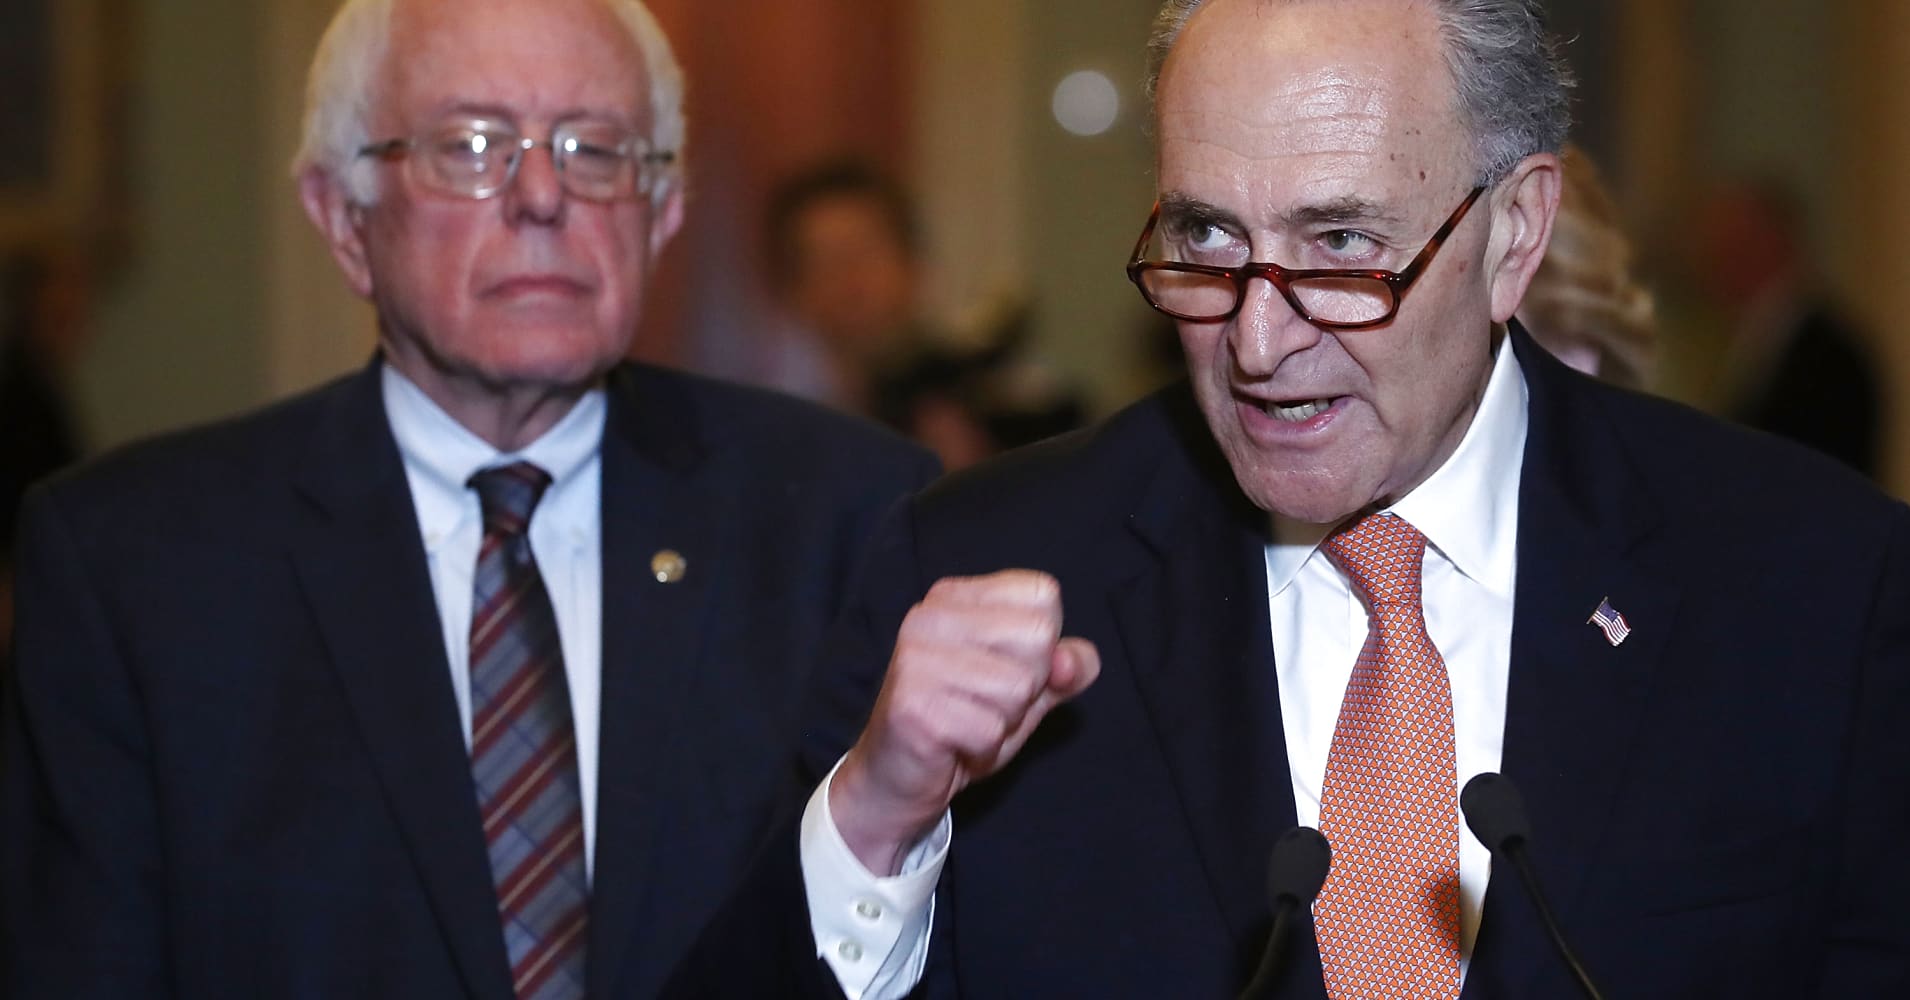 Chuck Schumer and Bernie Sanders call for restricting corporate share buybacks